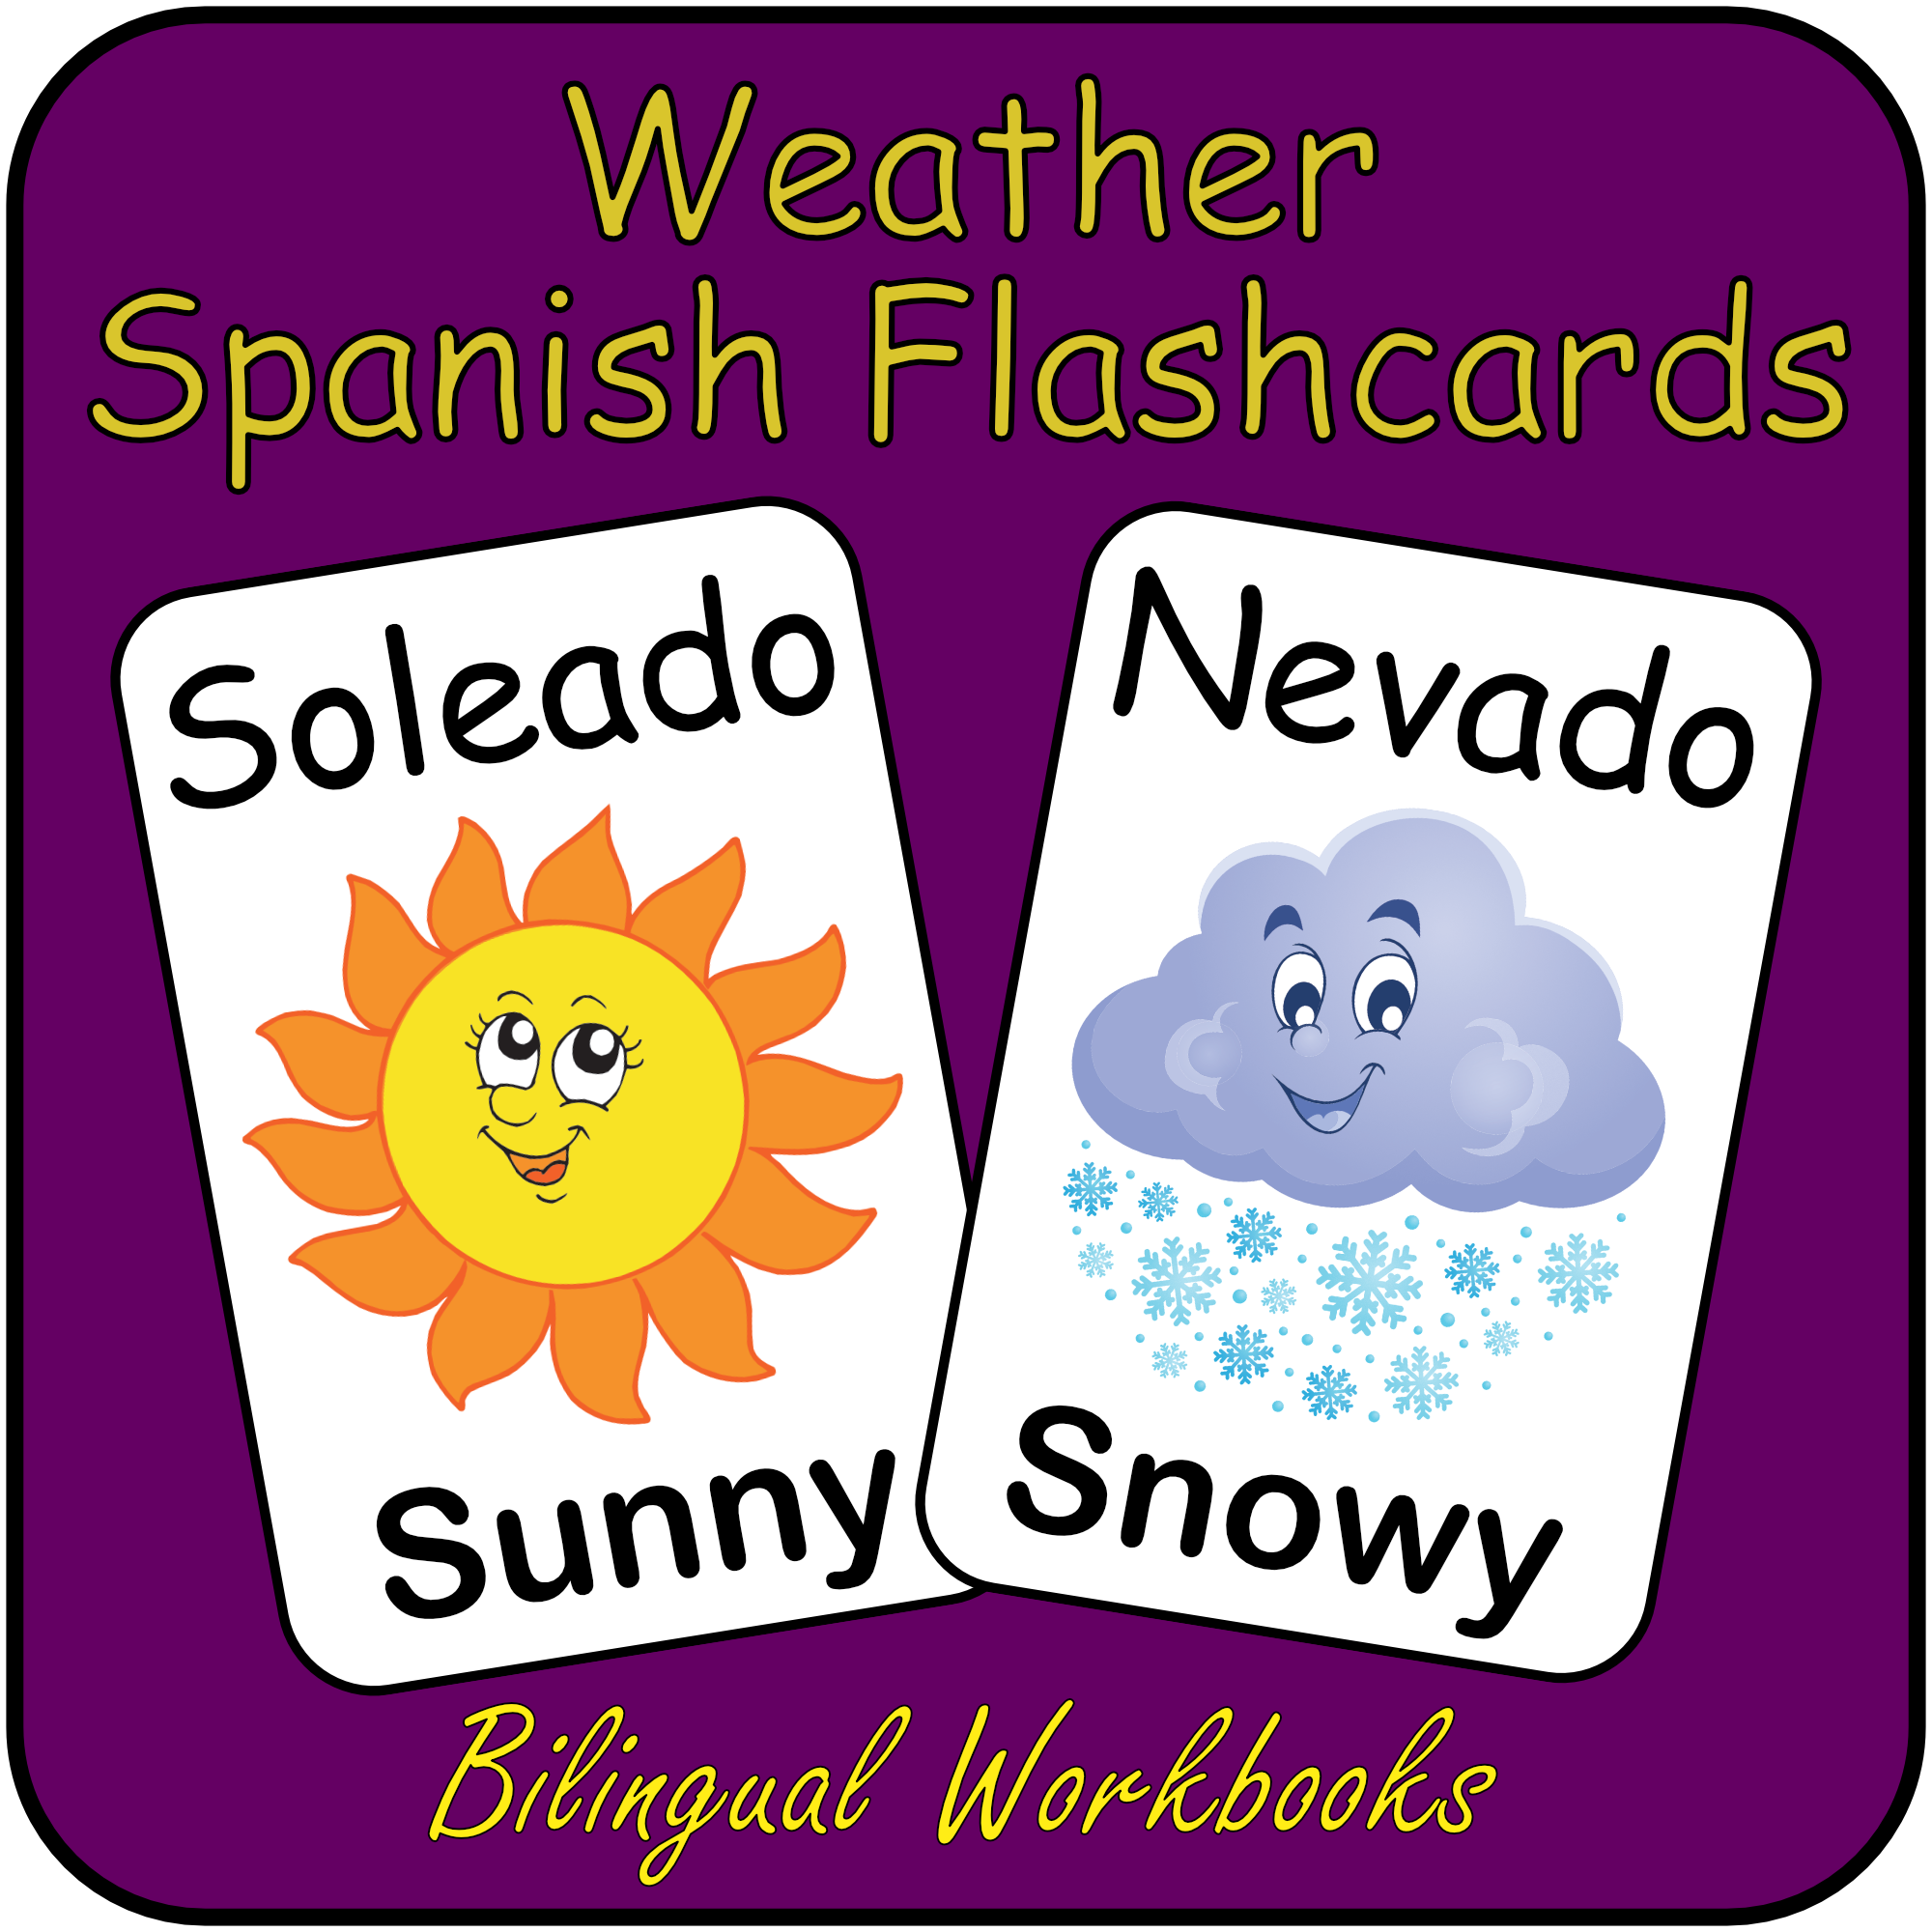 WEATHER - Spanish Flash Cards - Vocabulary Study flashcards with English and Spanish - Learn or Teach Spanish